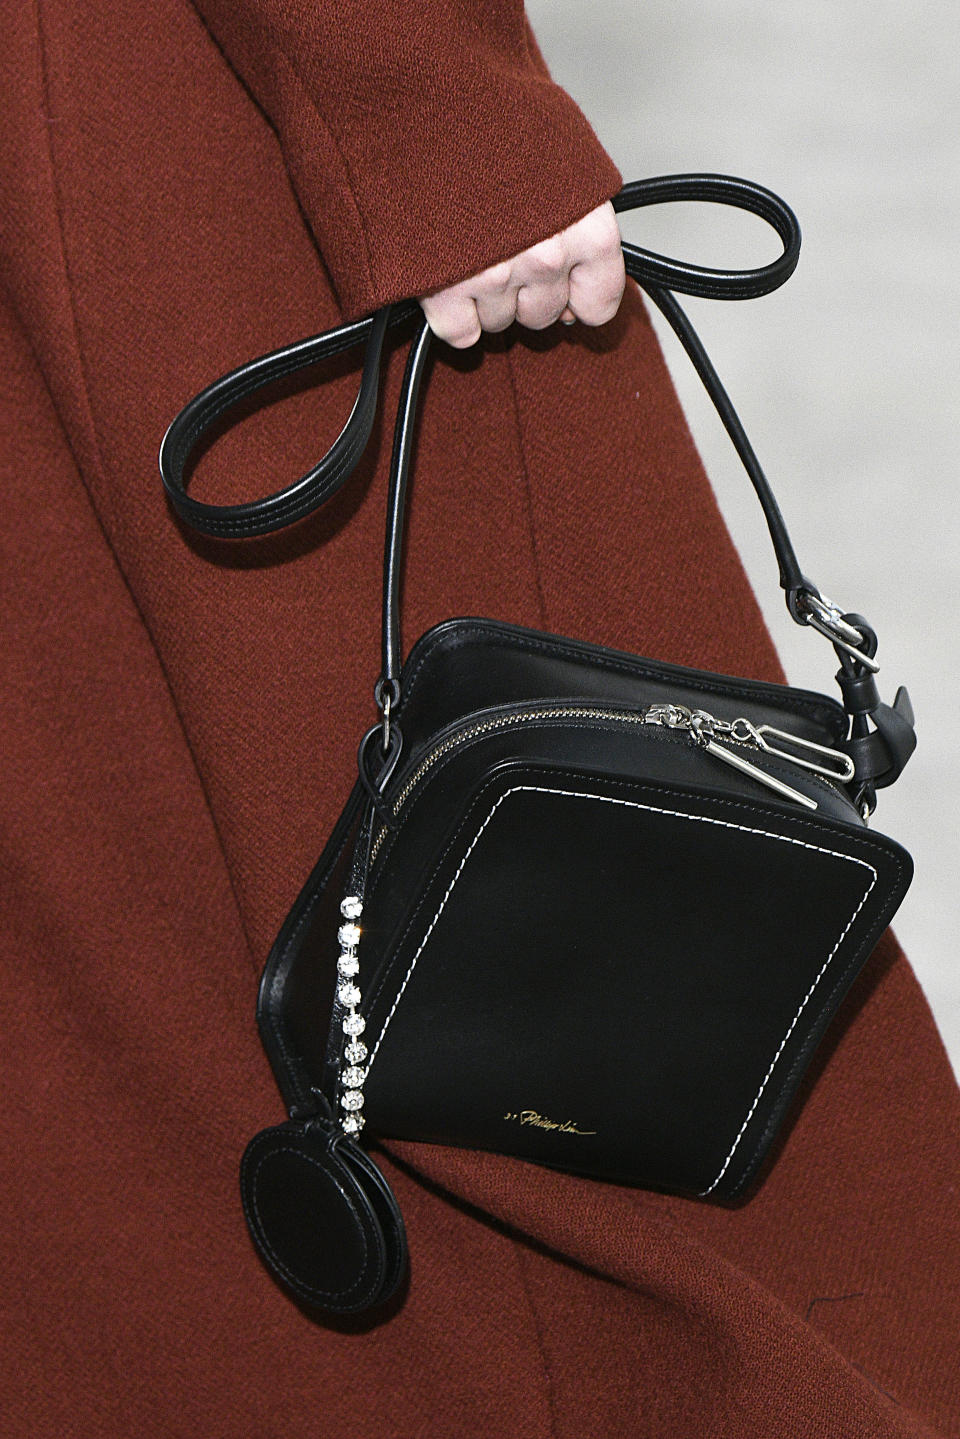 <p>A model carries a small, boxy black bag from the 3.1 Phillip Lim show. (Photo: Getty Images) </p>